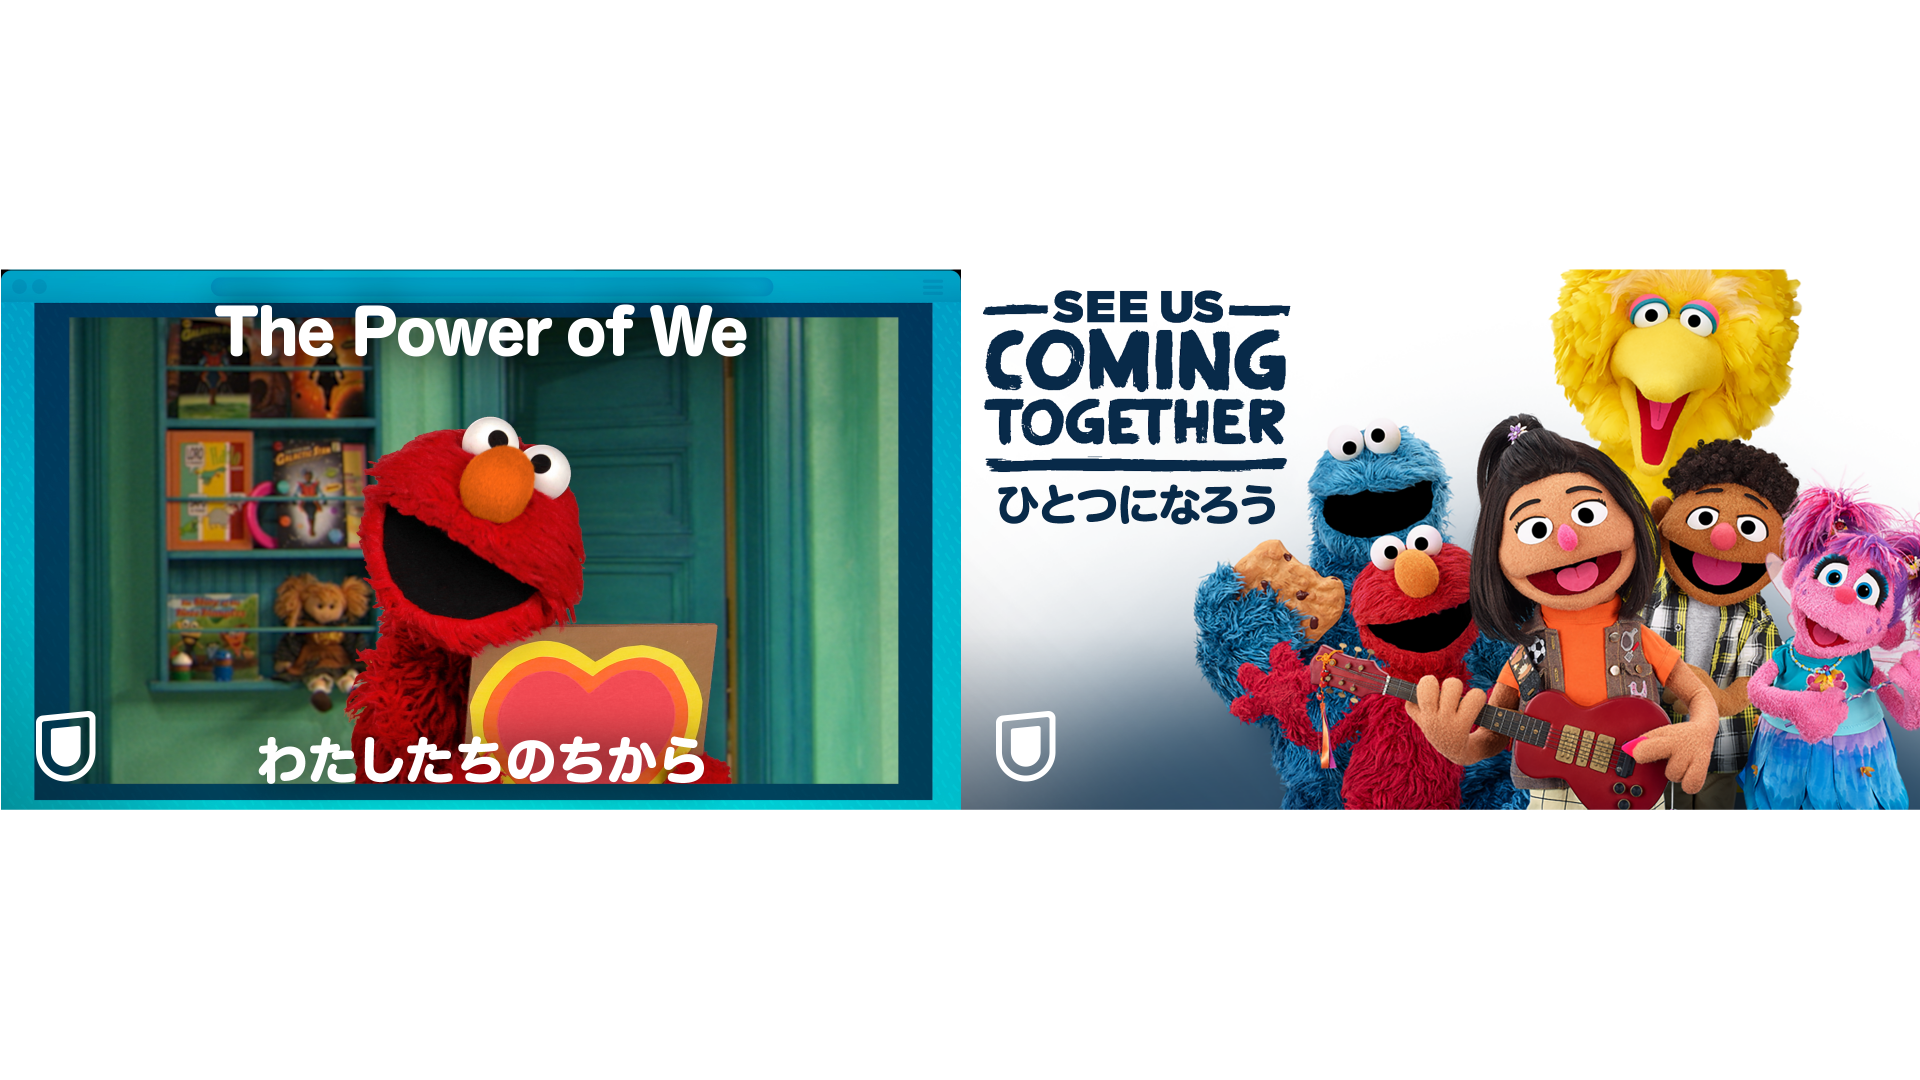 Sesame Workshop ®, Sesame Street ® and associated characters, trademarks, service marks and design elements are trademarks and copyrights owned by Sesame Workshop. ©2020 Sesame Workshop.